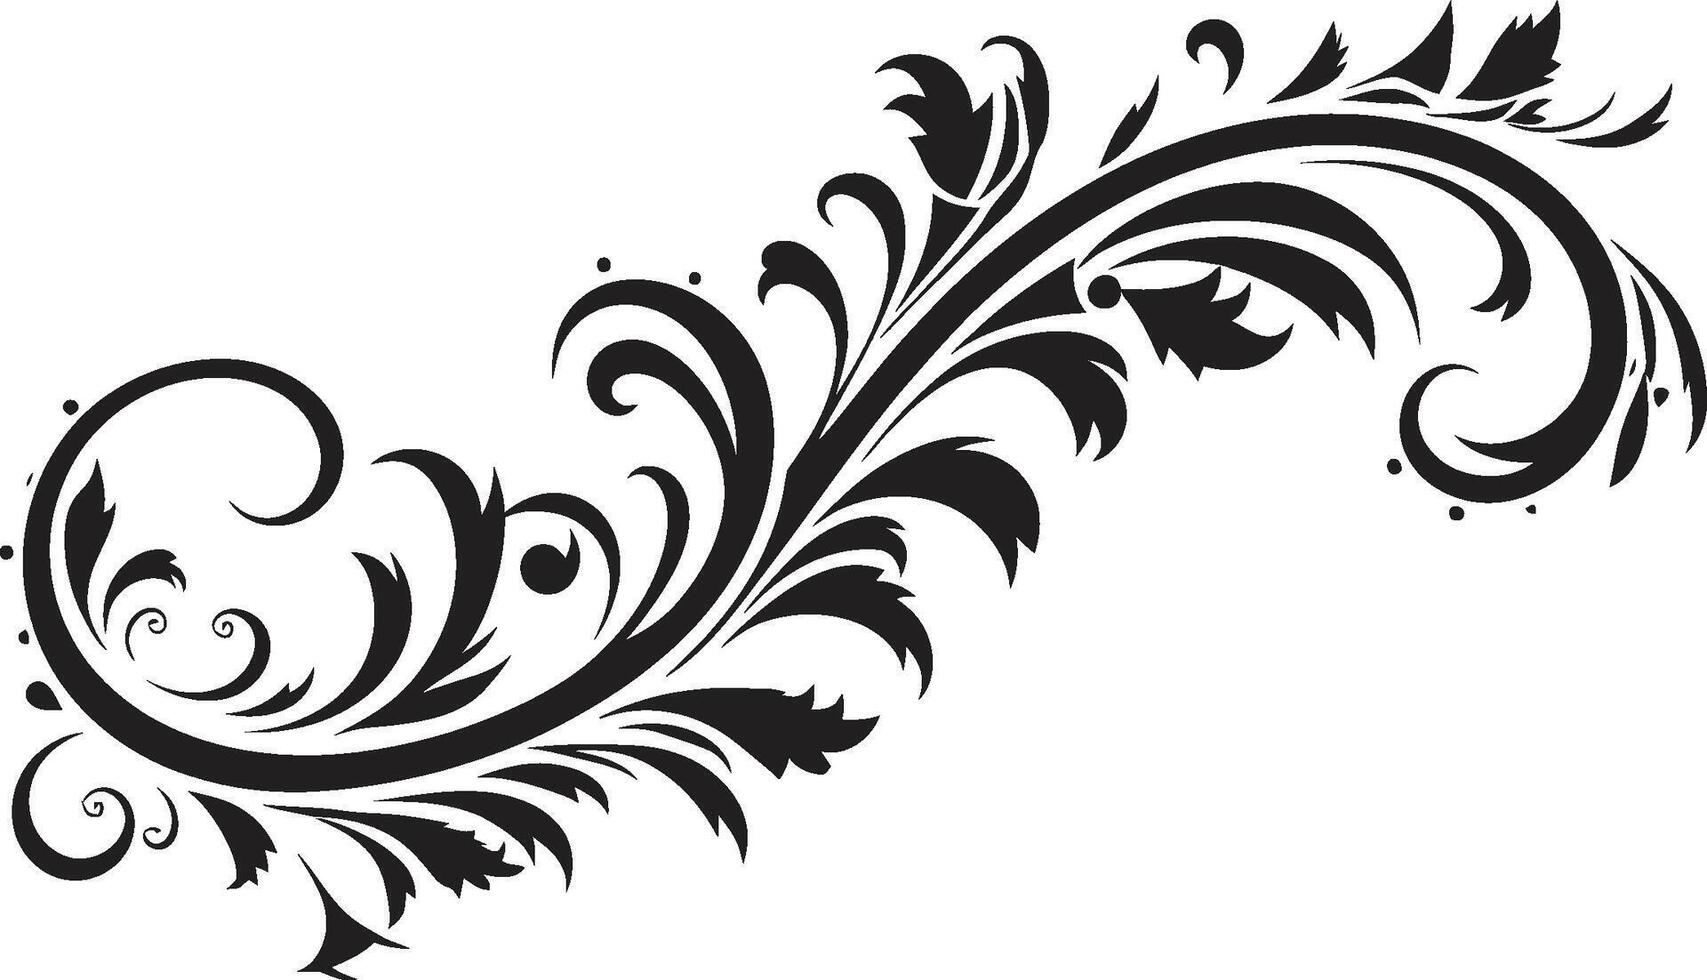 Whimsy in Waves Black Doodle Logo with Decorative Touch Elegance Embellished Doodle Decorative Vector Icon in Sleek Black